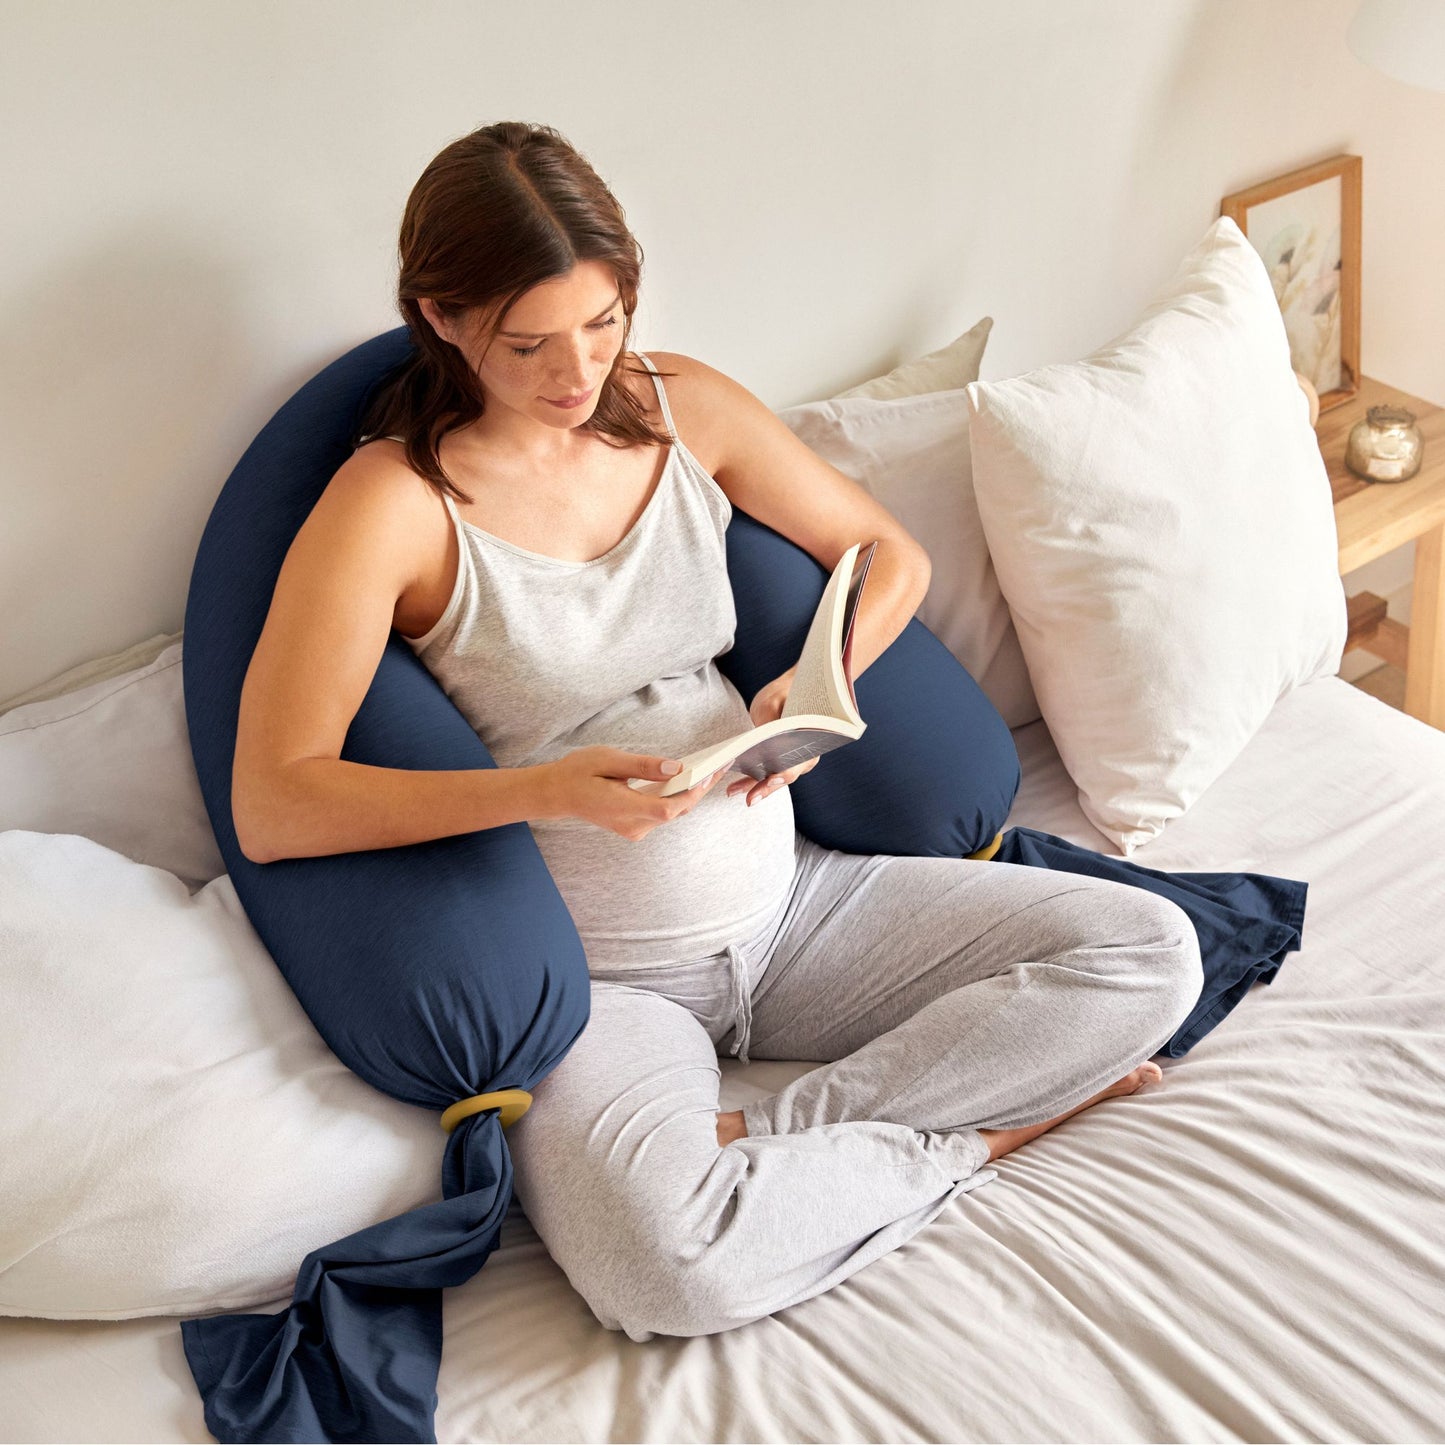 Bbhugme Pregnancy Pillow In Midnight - Blue